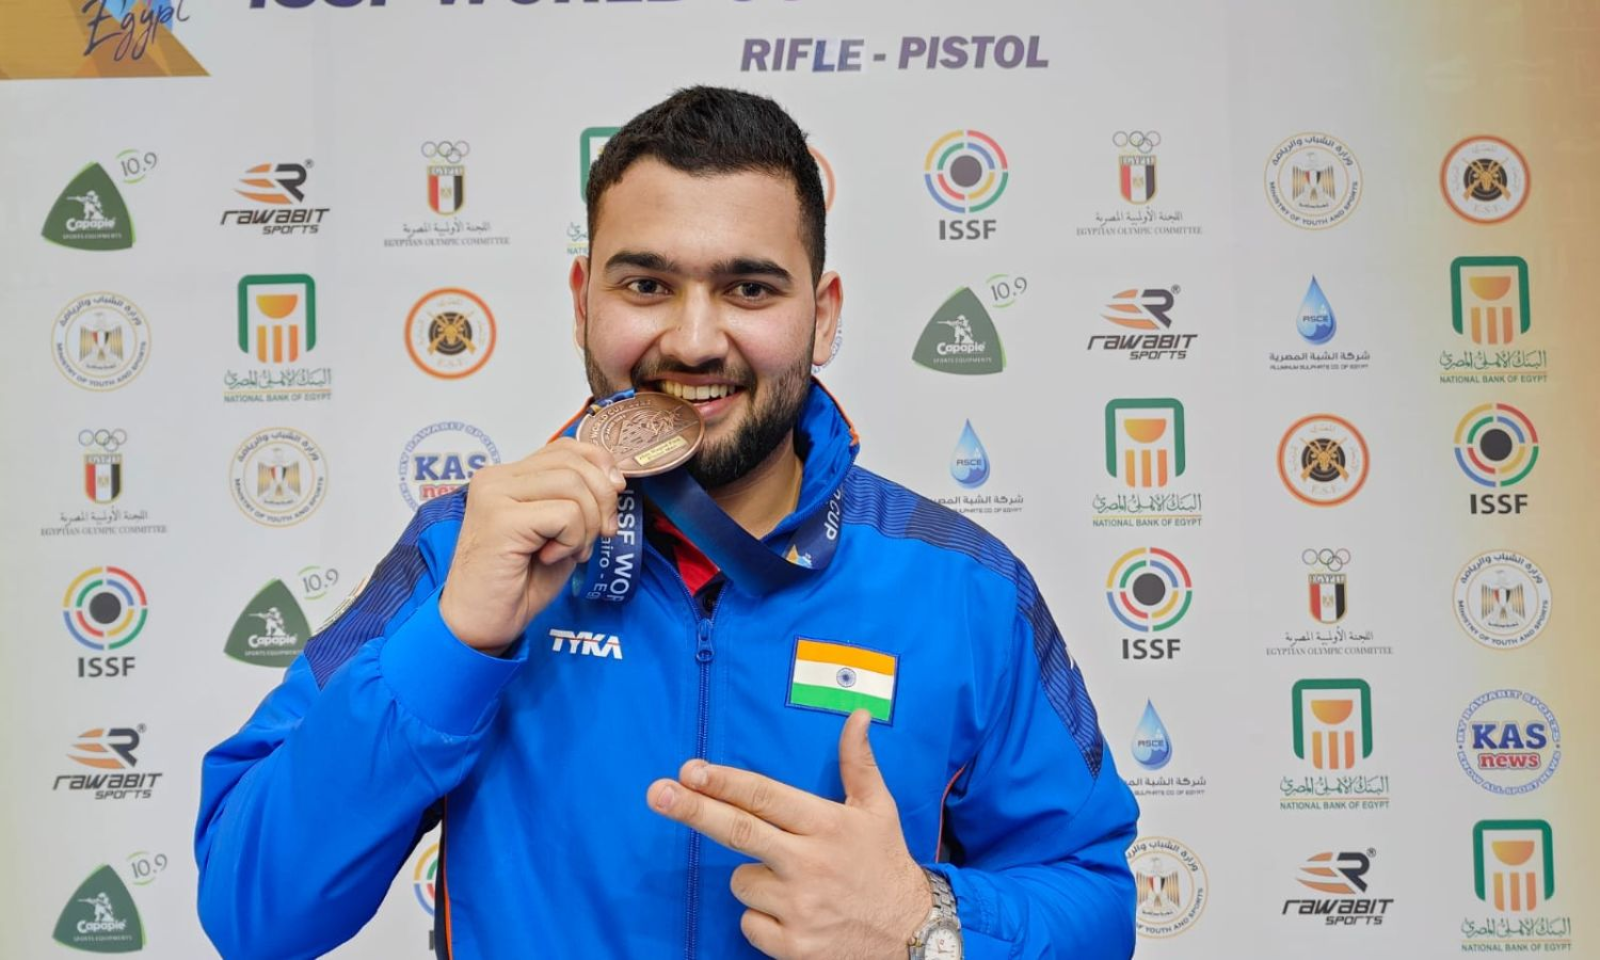 Anish Bhanwala wins bronze medal in men’s 25m rapid fire pistol event at ISSF World Cup Final 2023